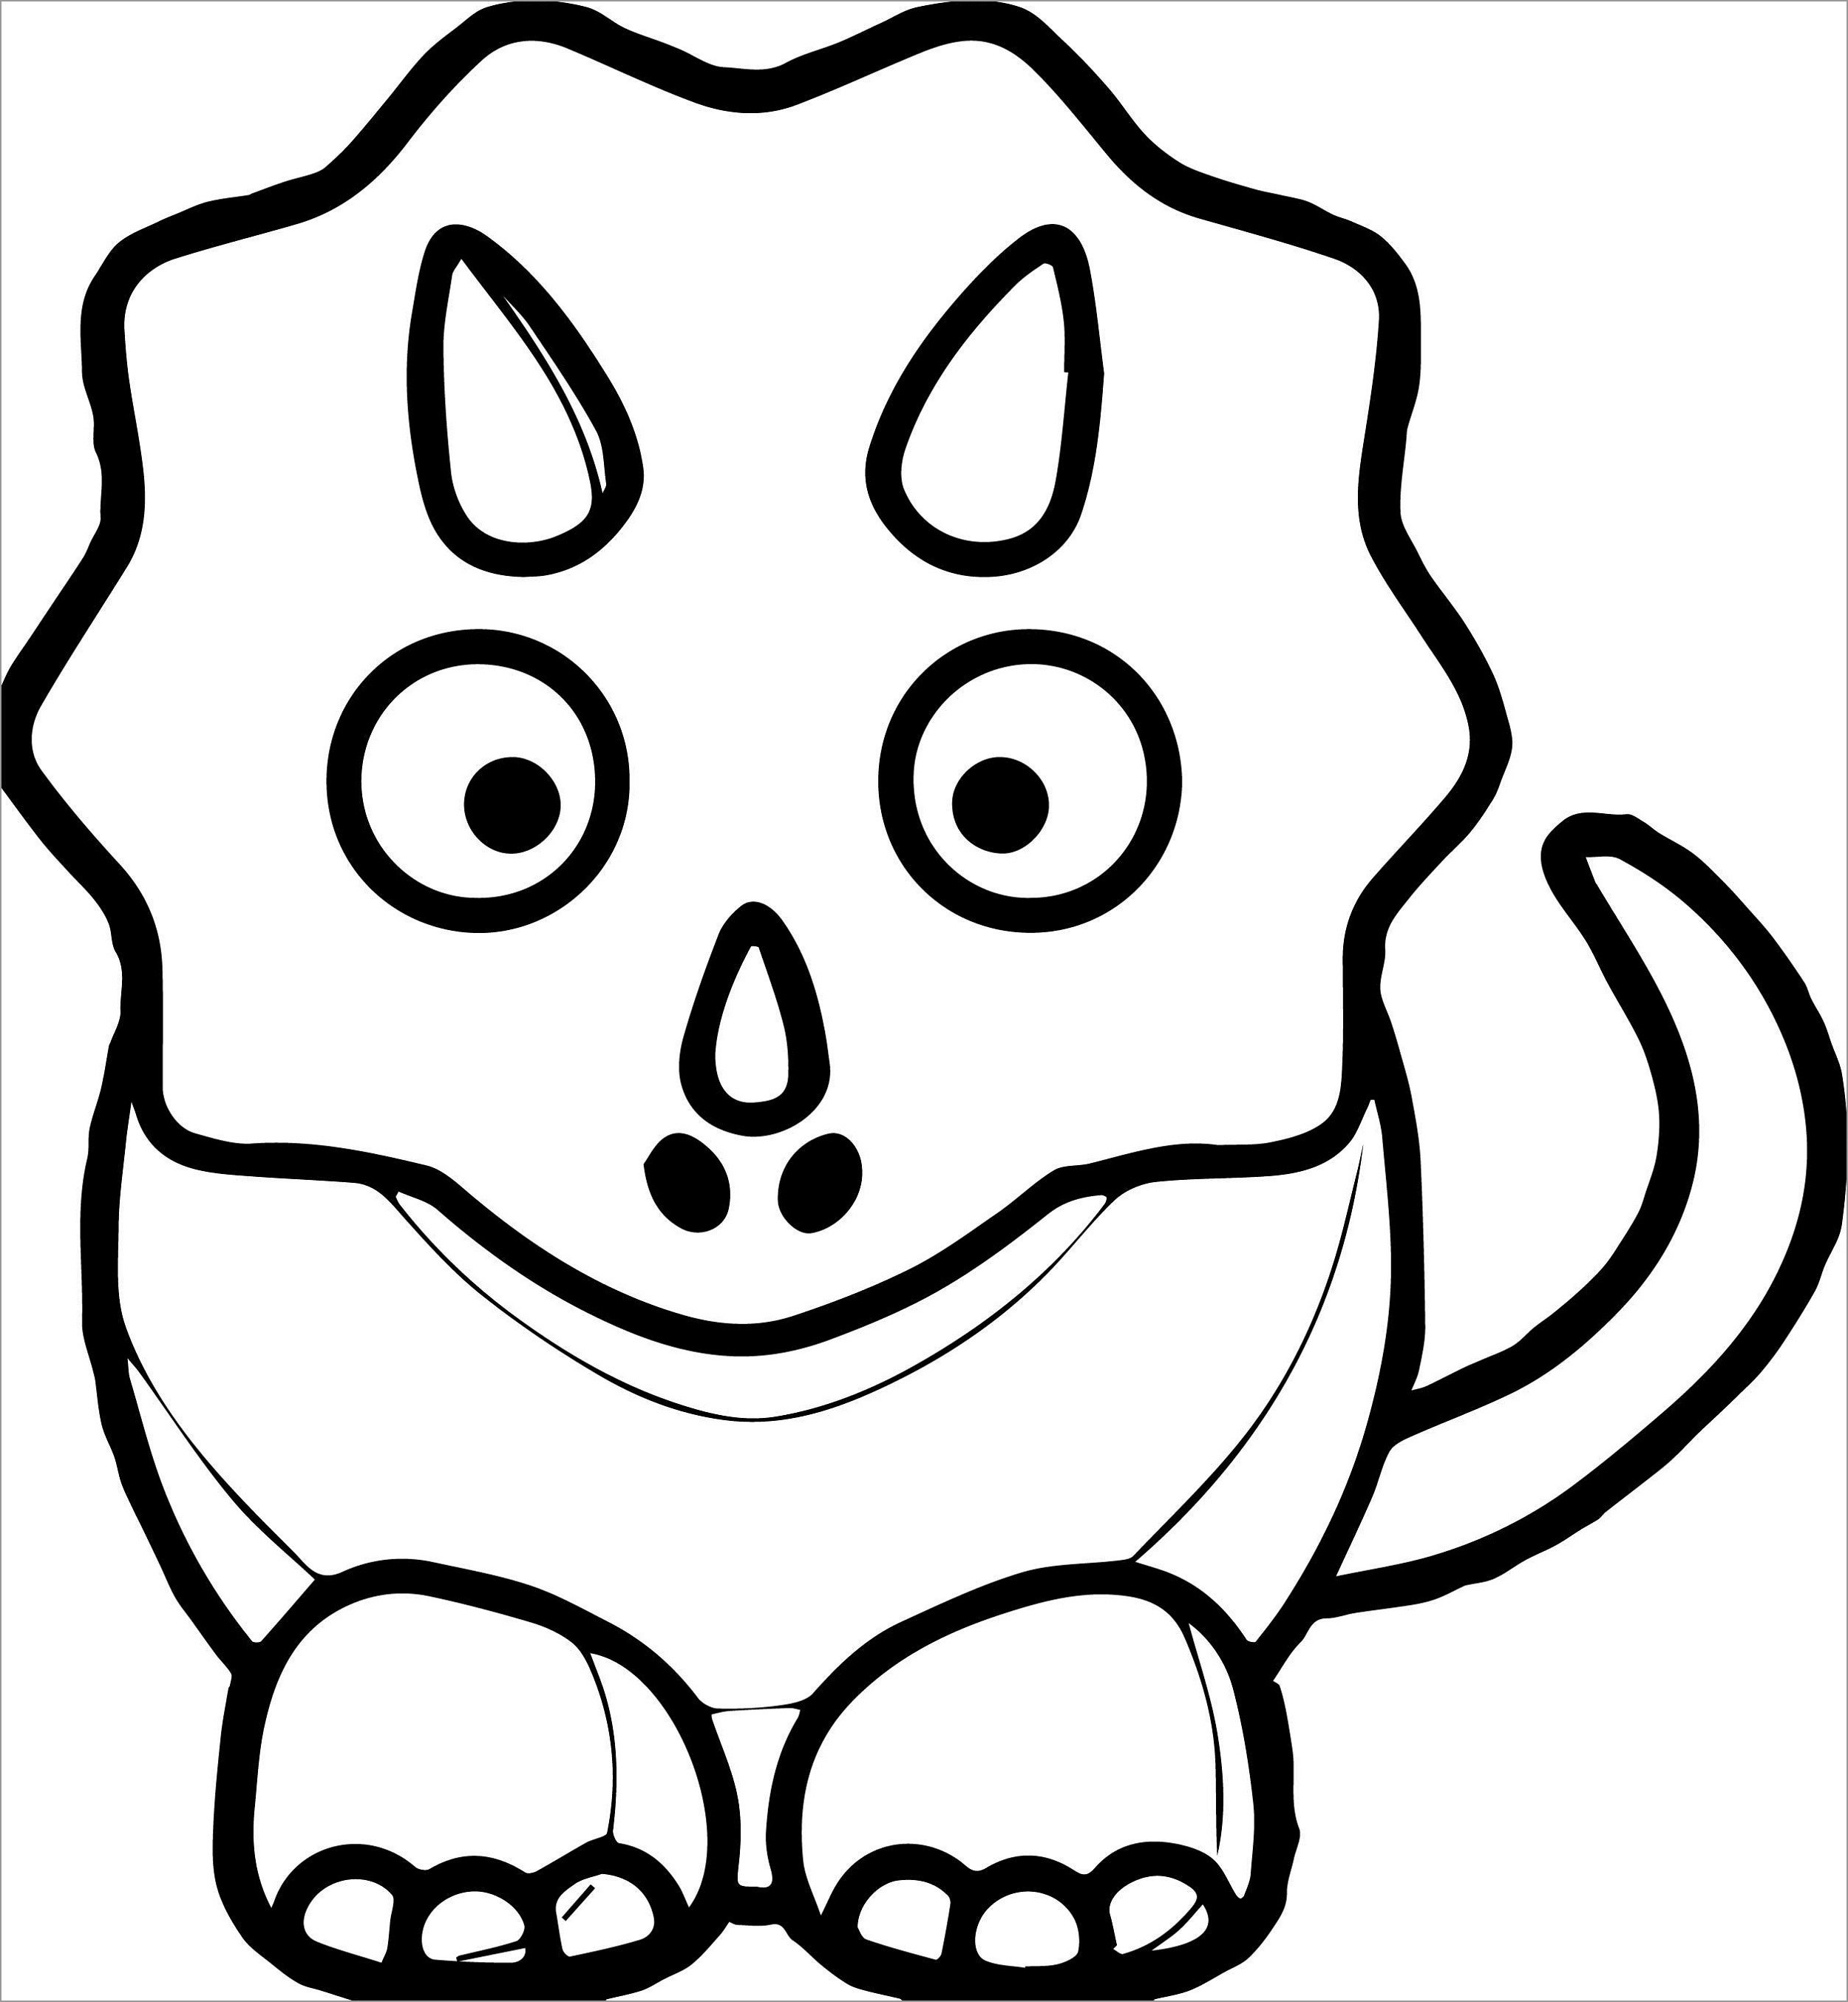 dinosaurs-coloring-pages-coloringbay